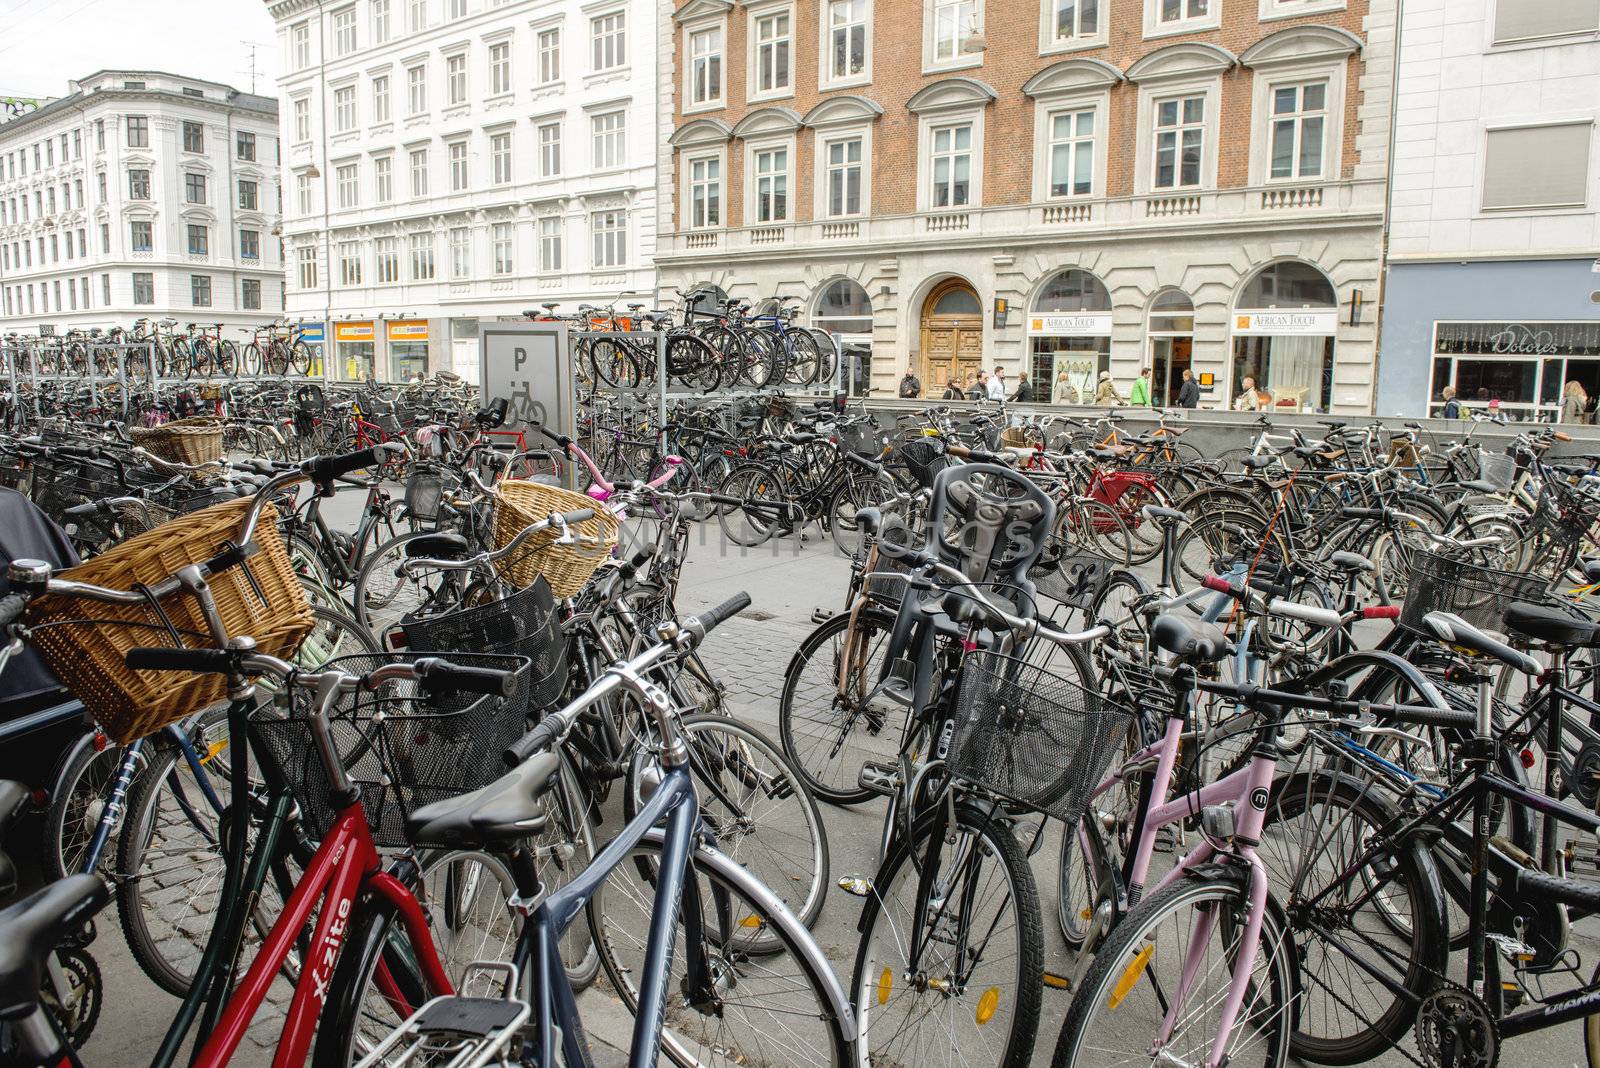 Copenhagen, Denmark - February 2012: In Copenhagen practically everybody rides a bike. At present 55 percent of all Copenhageners cycle 1.2 million kilometres daily which is one of the highest percentages in the world.